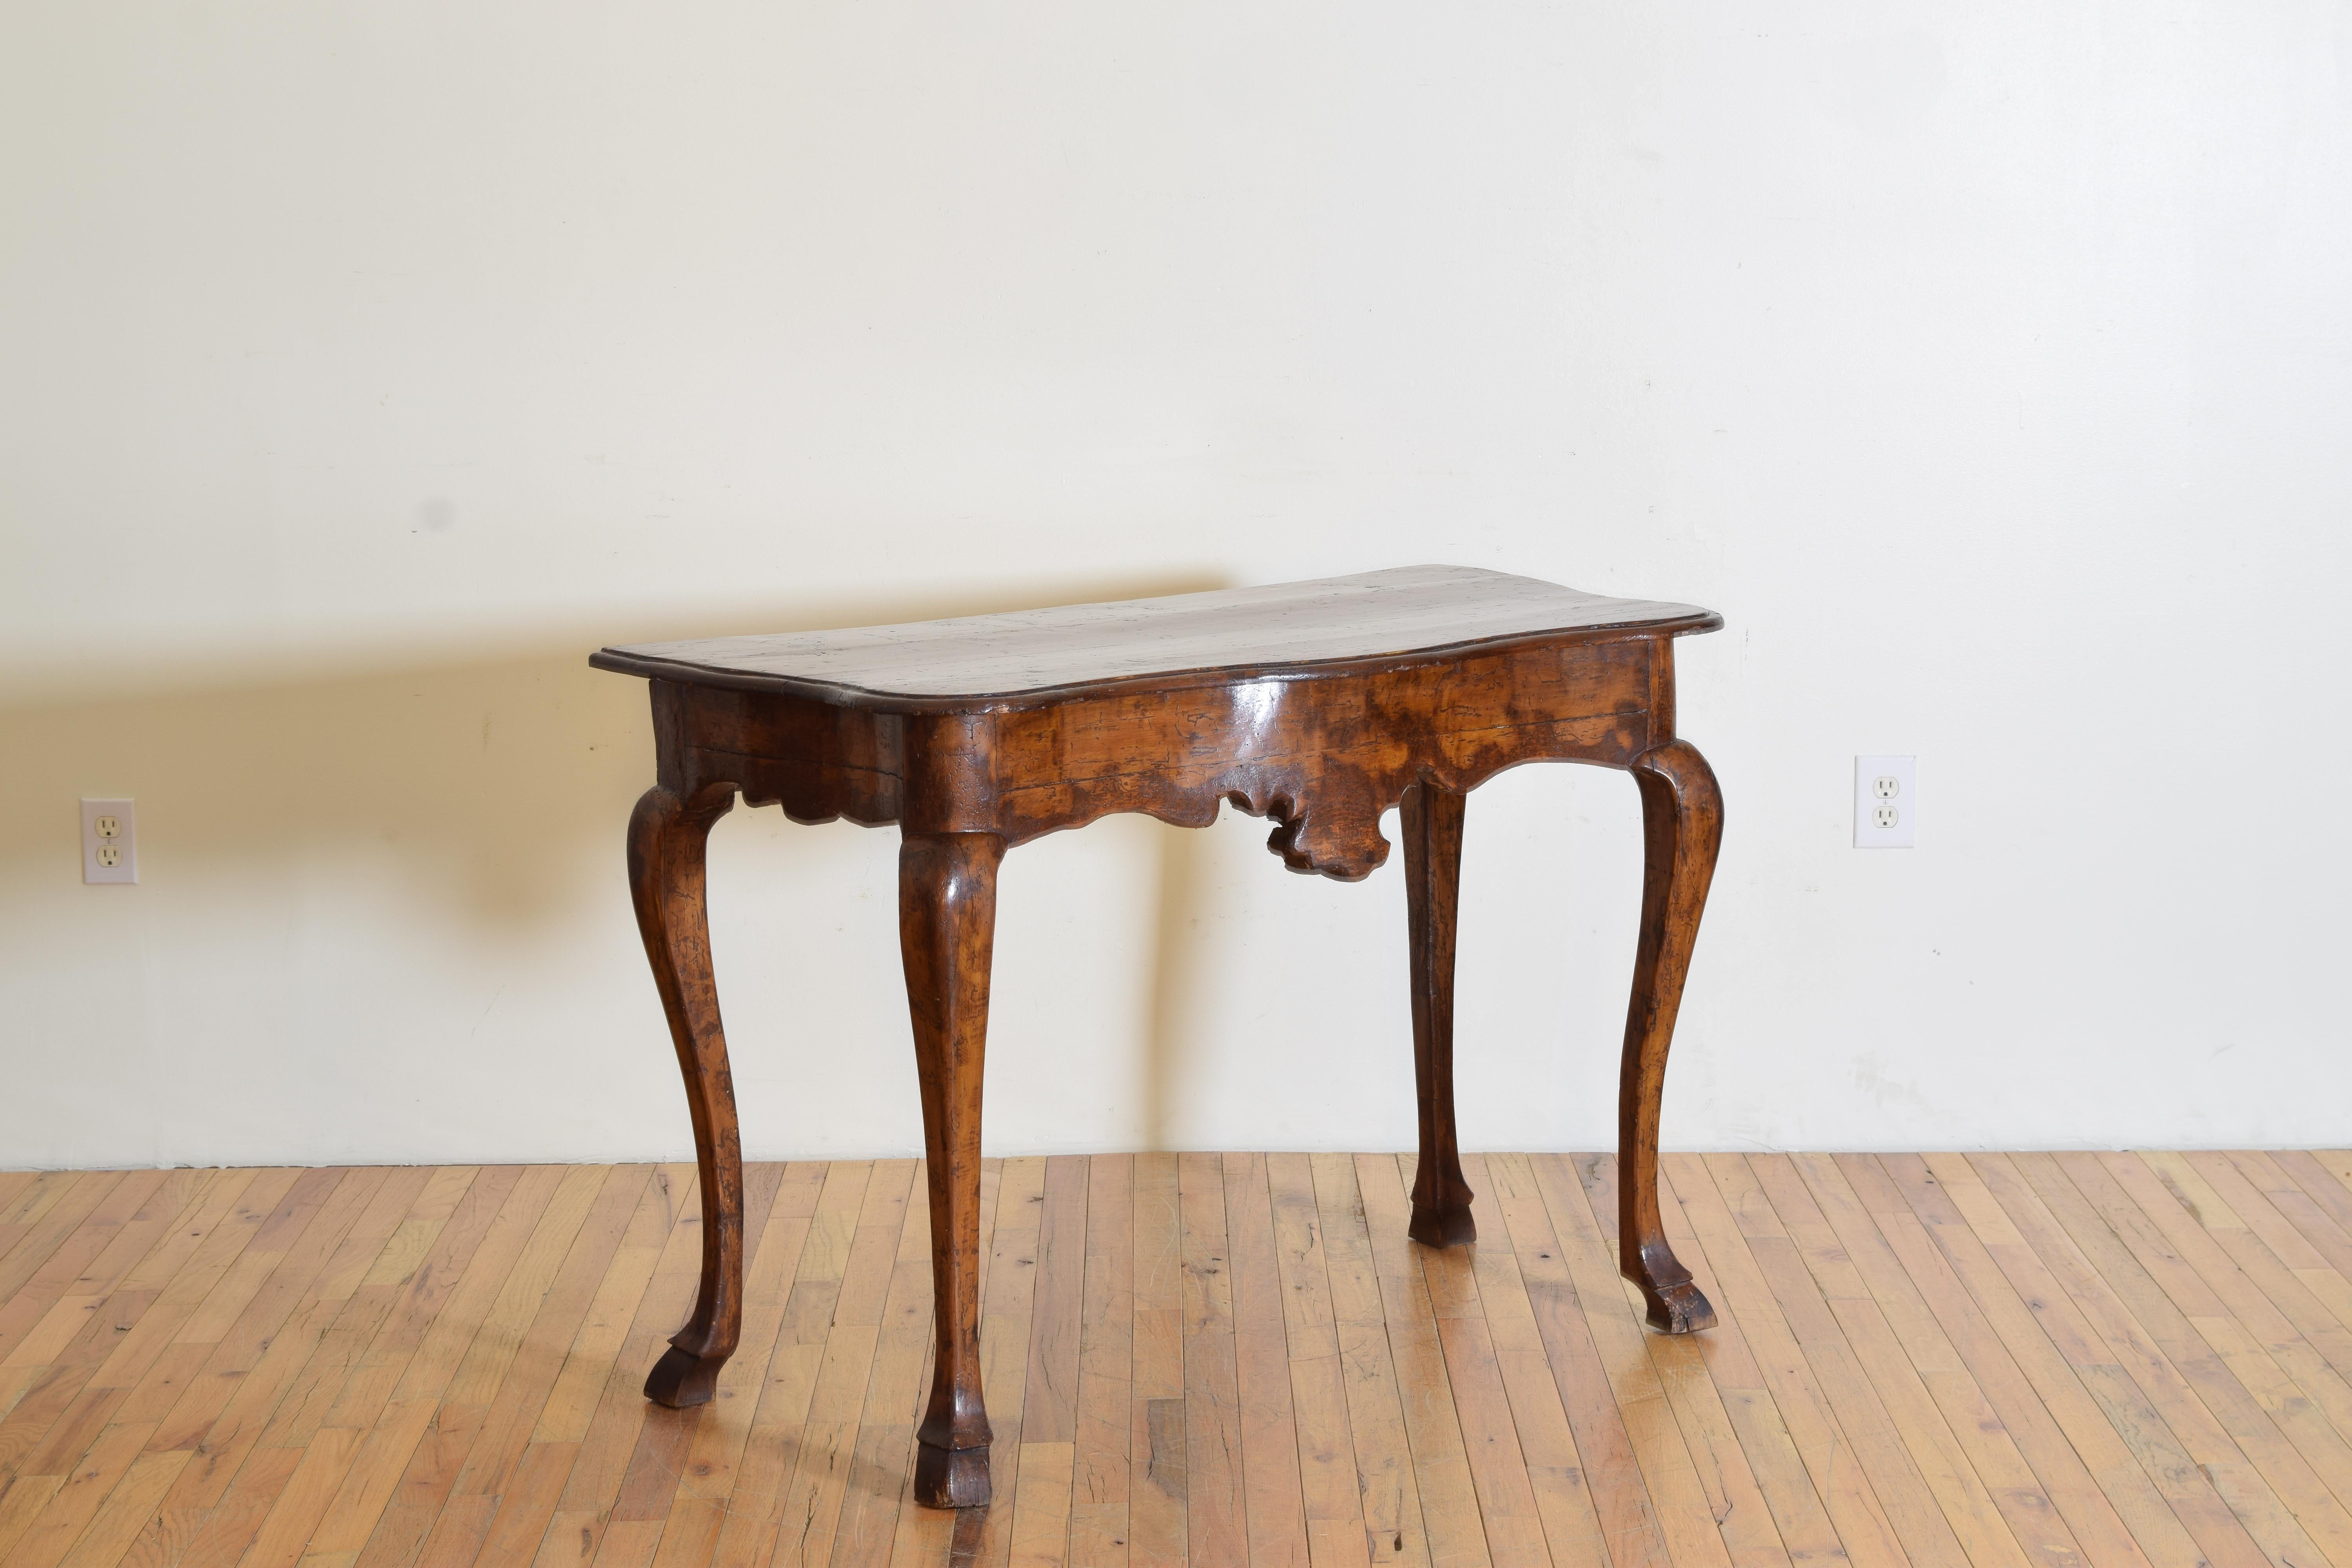 Italian, Tuscan, Louis XIV Shaped Walnut & Fir Wood Console Table, mid 18th c In Good Condition For Sale In Atlanta, GA